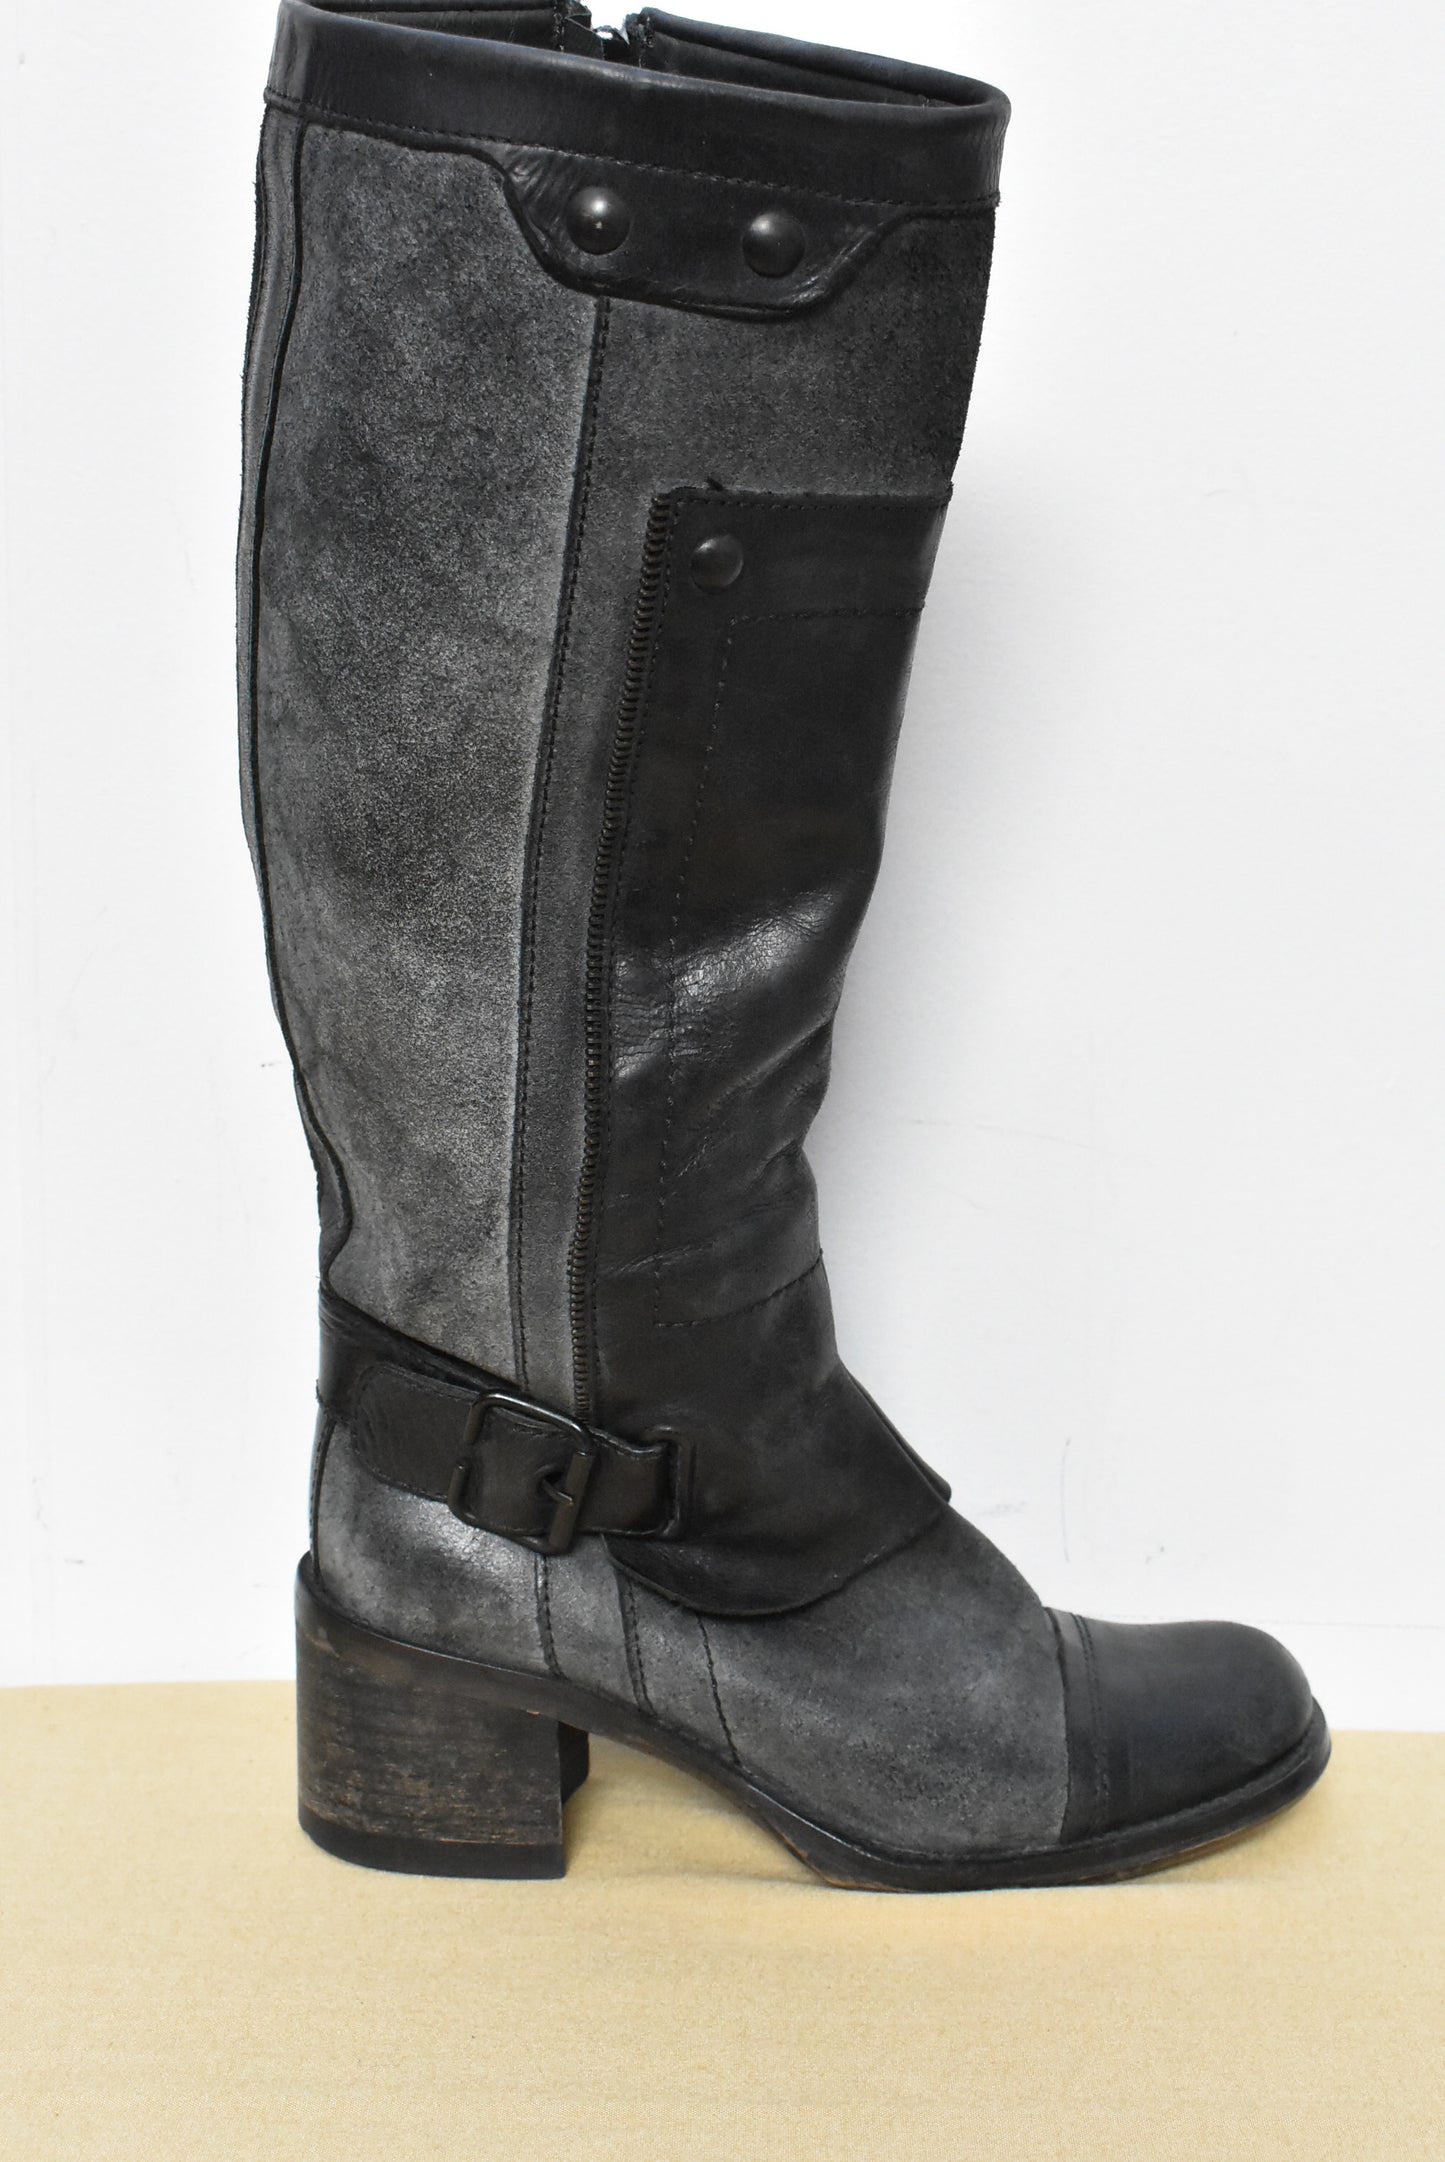 Spiral leather knee high boots, 38